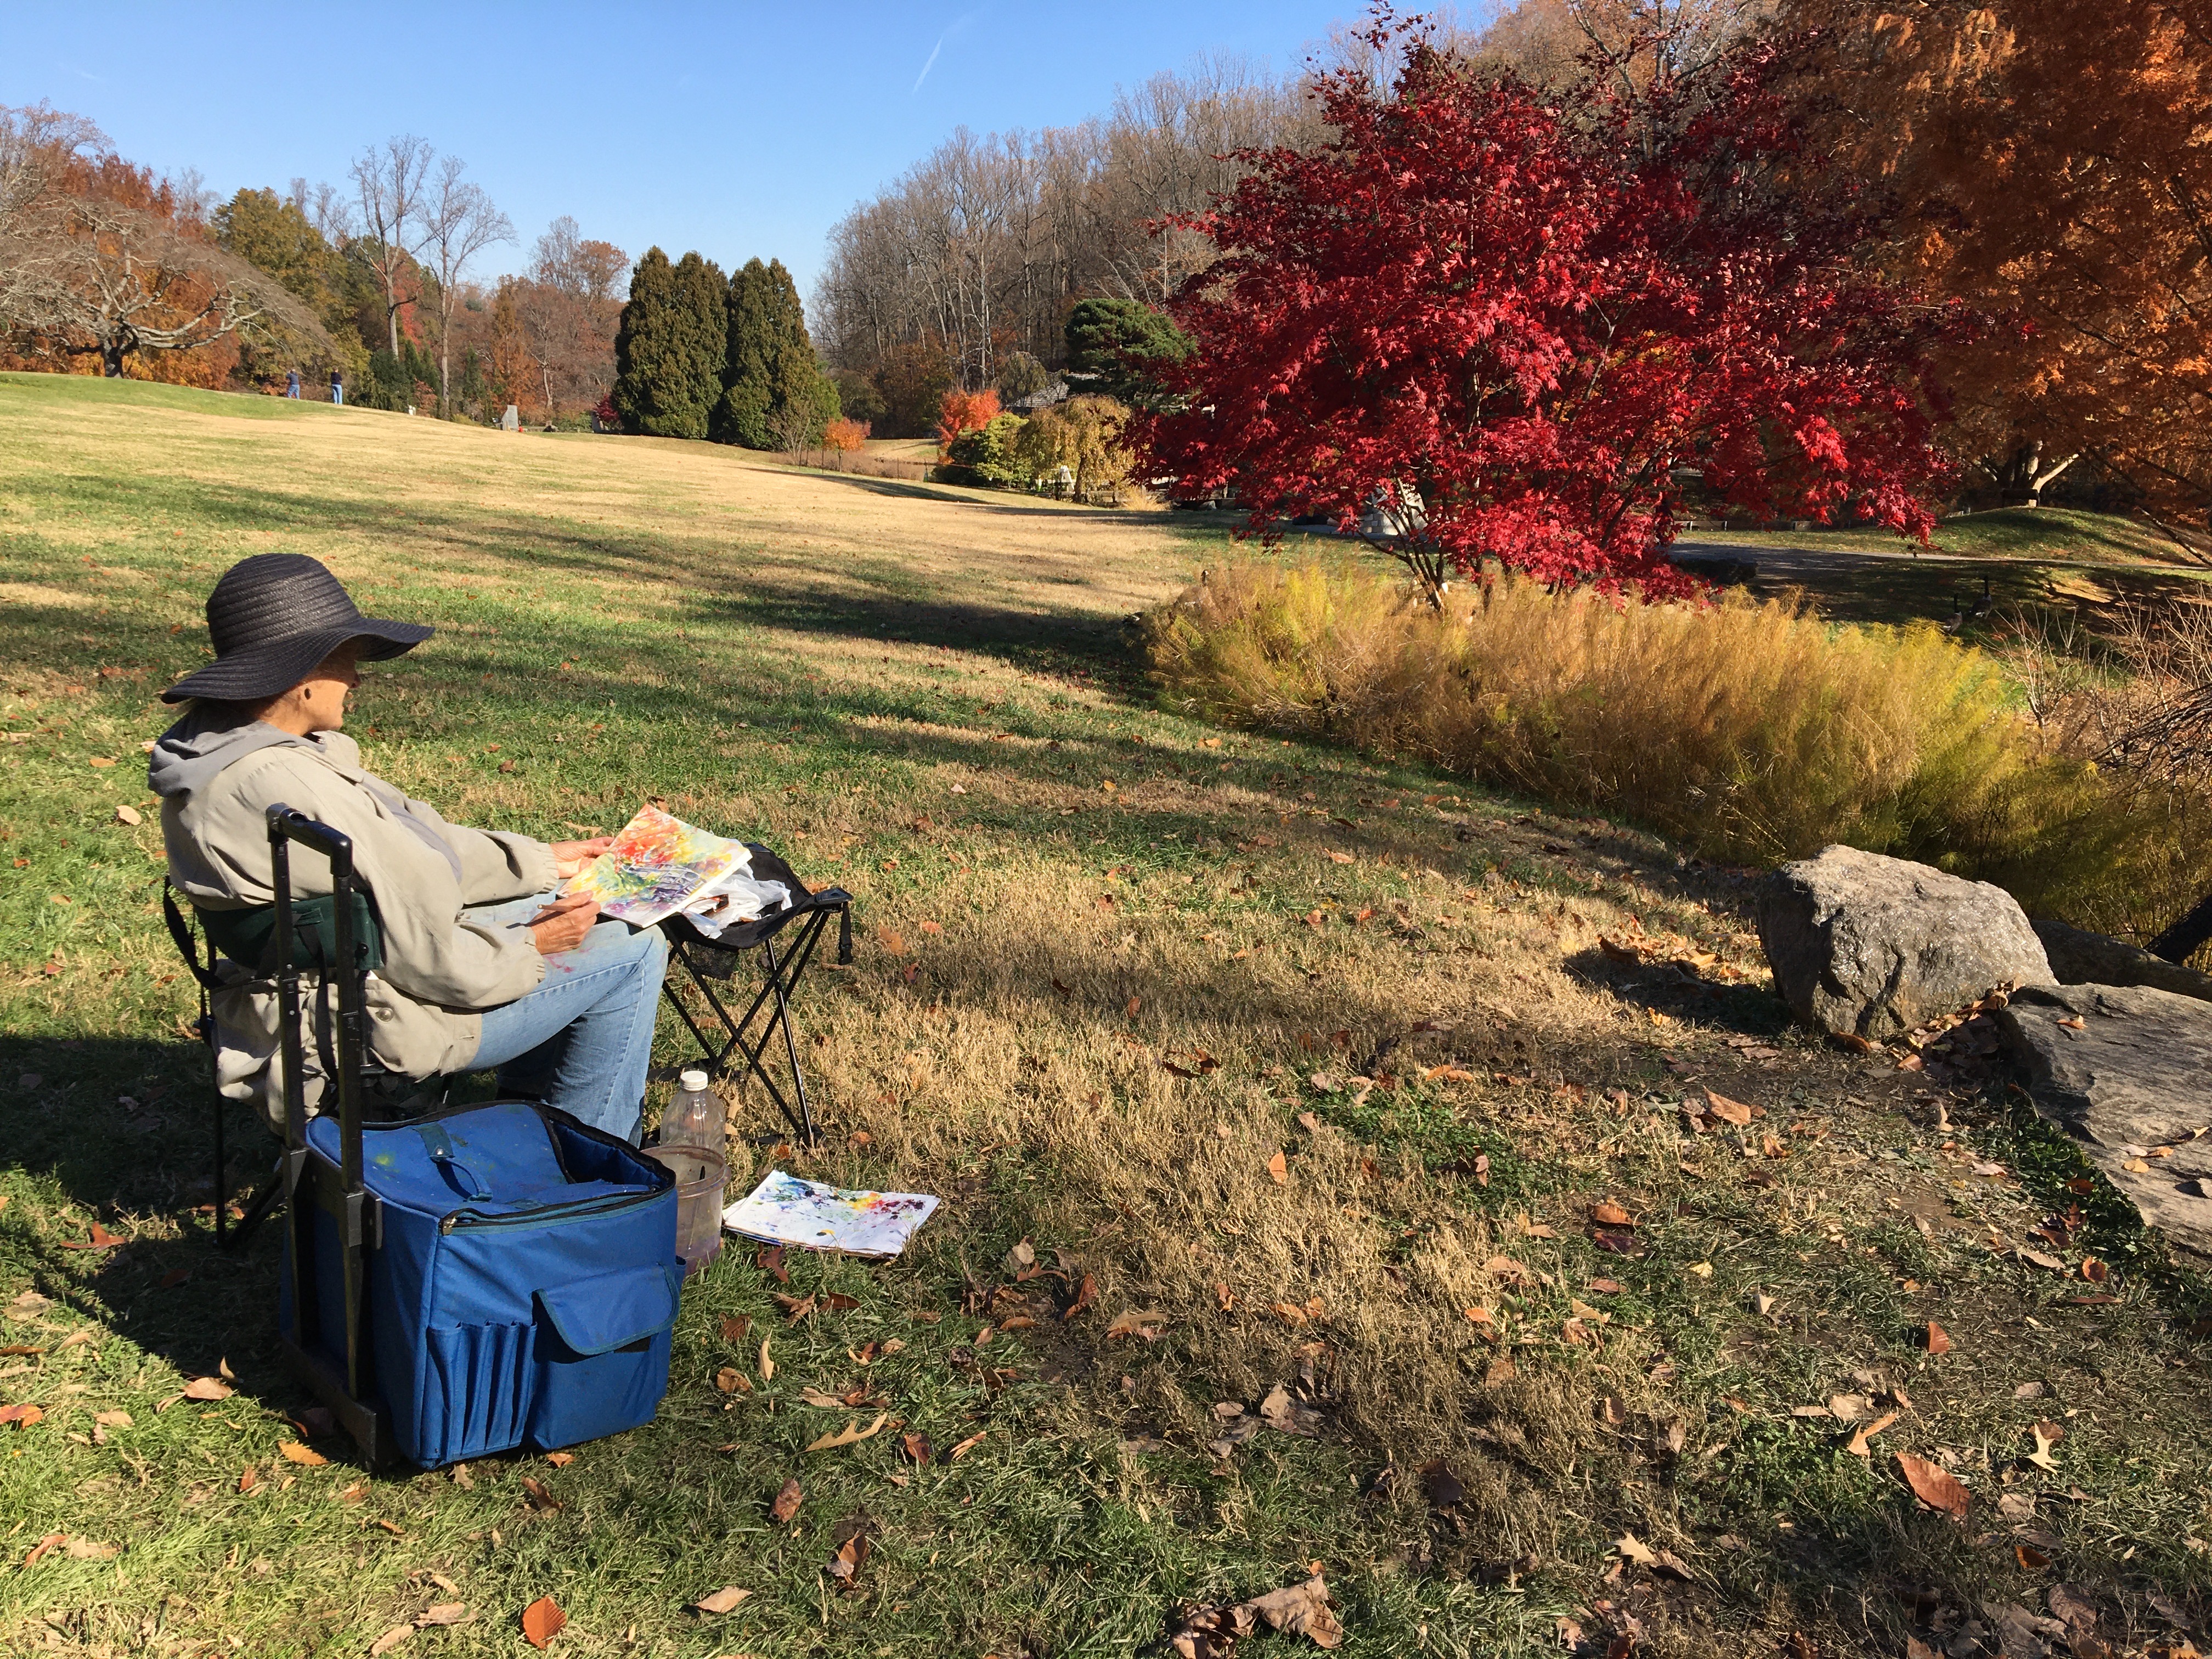 artist painting outdoors